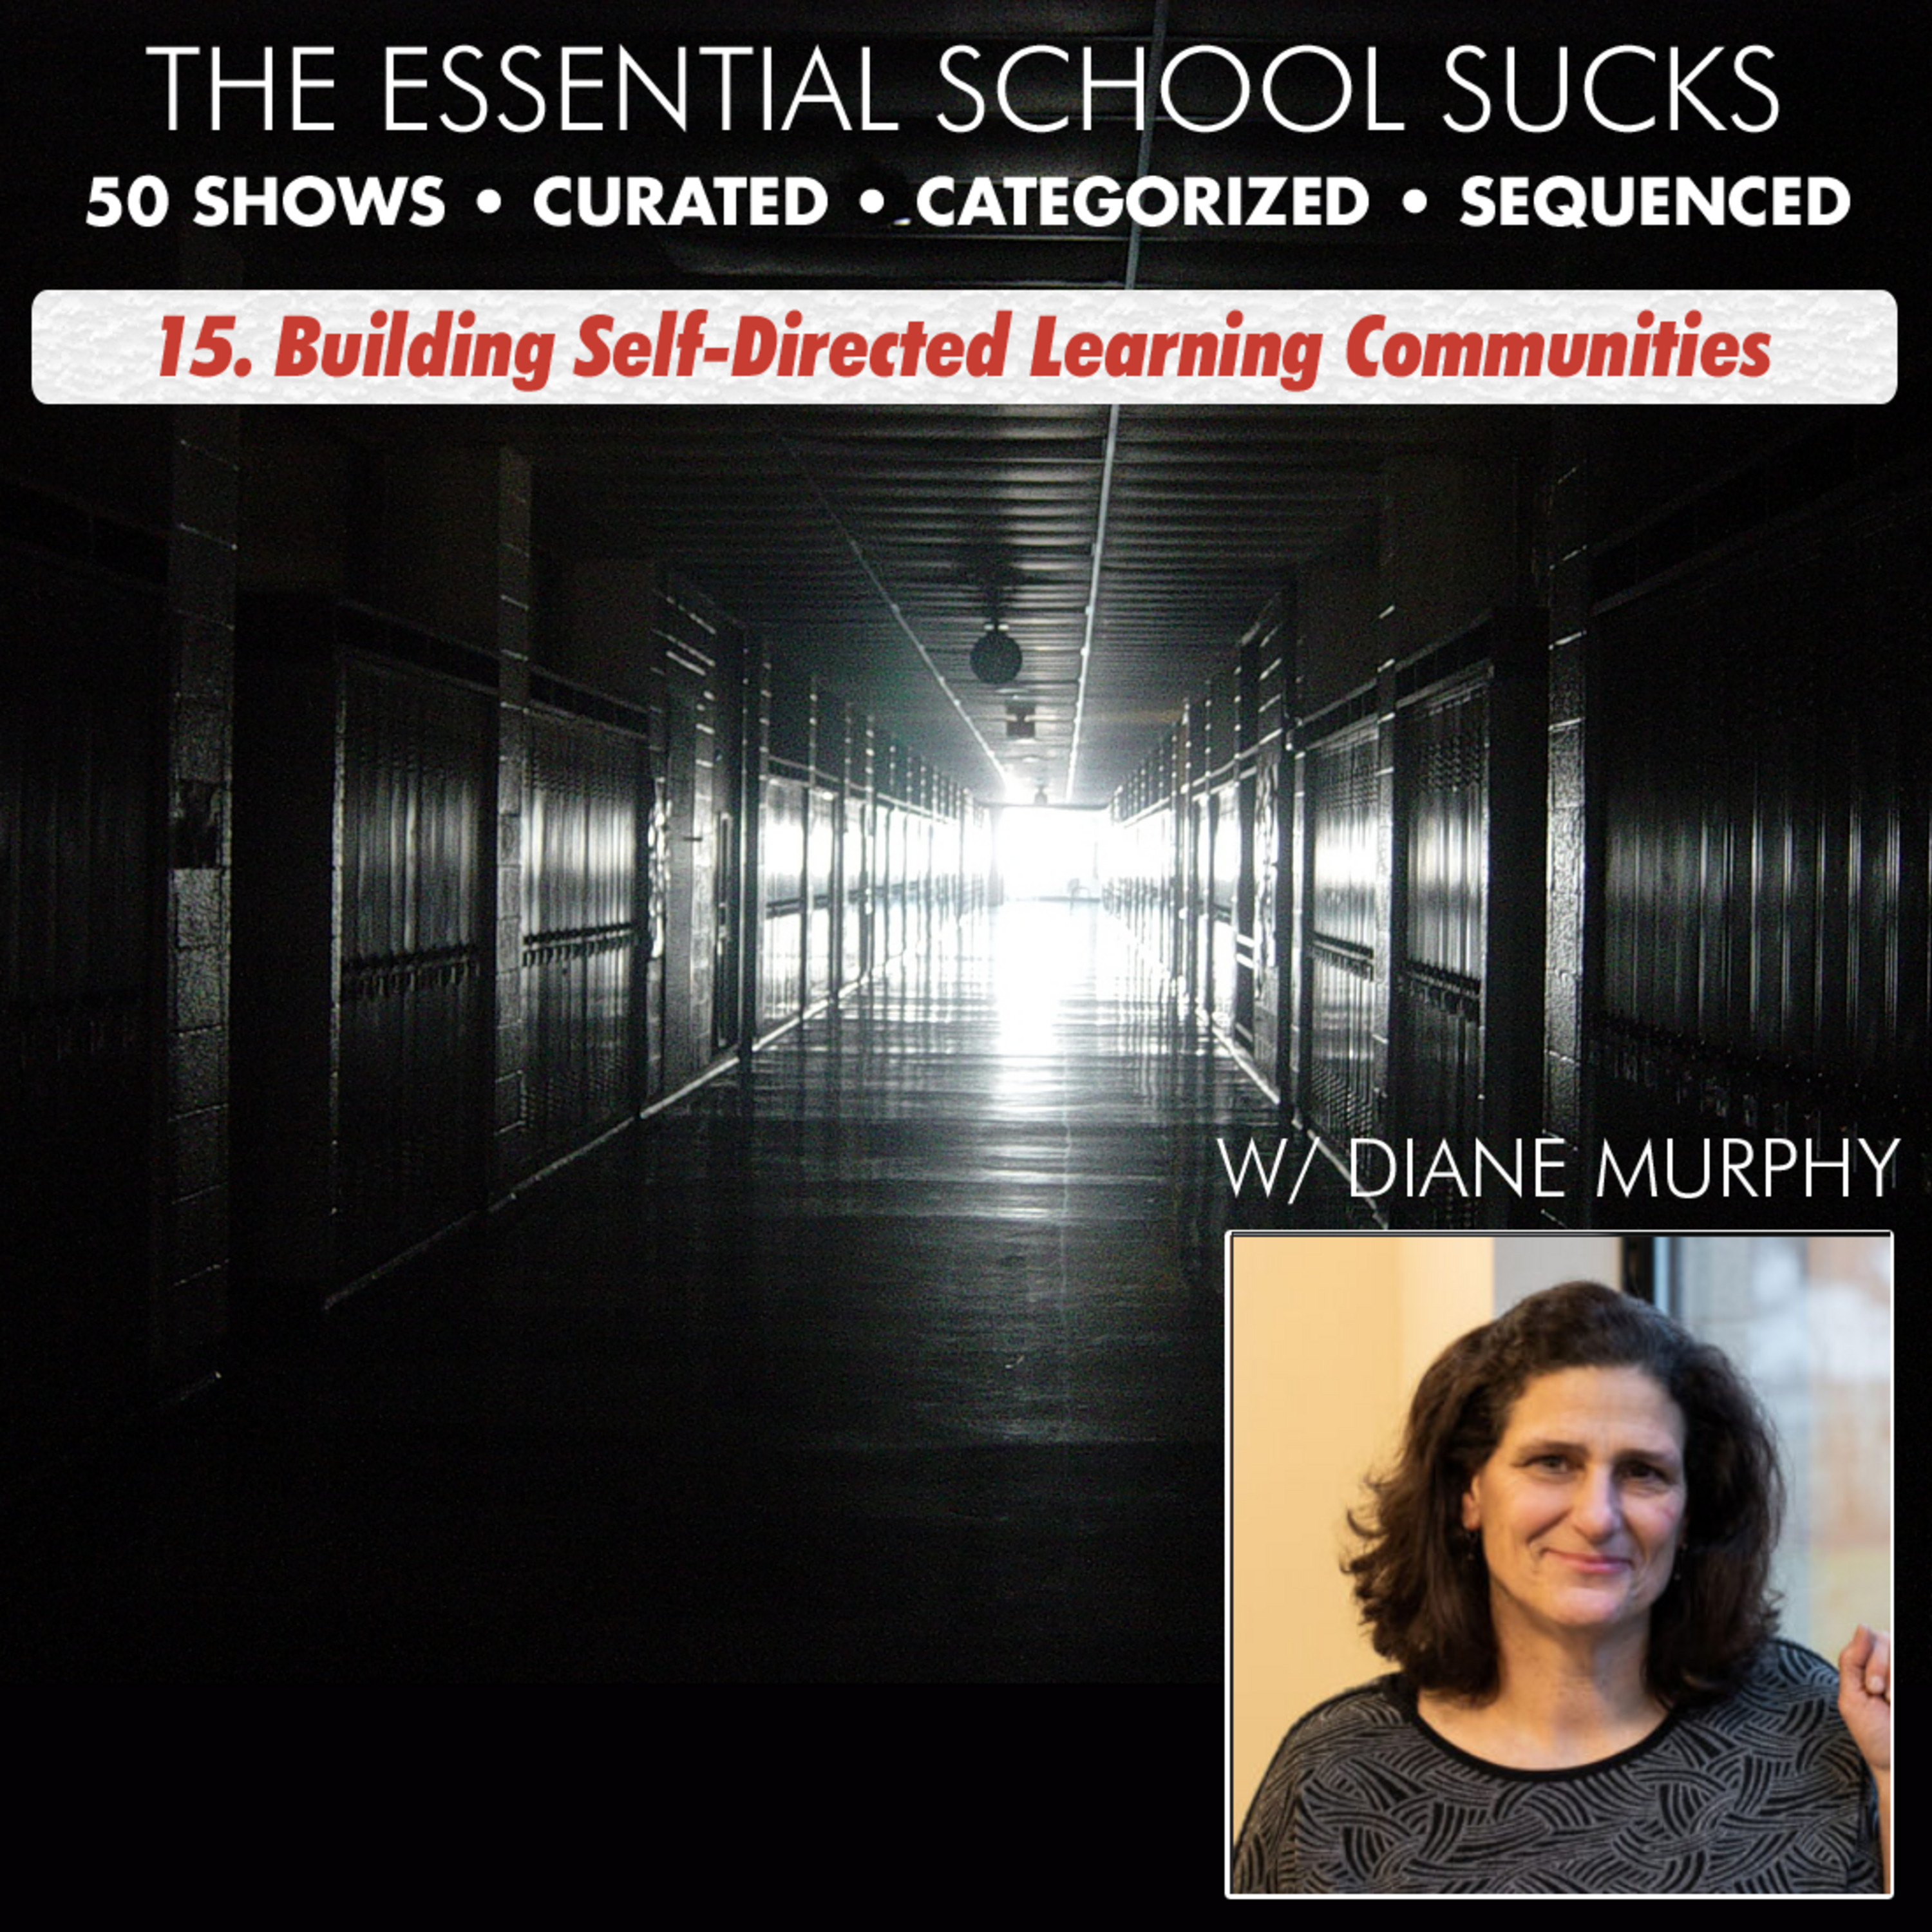 15. Building Self-Directed Learning Communities